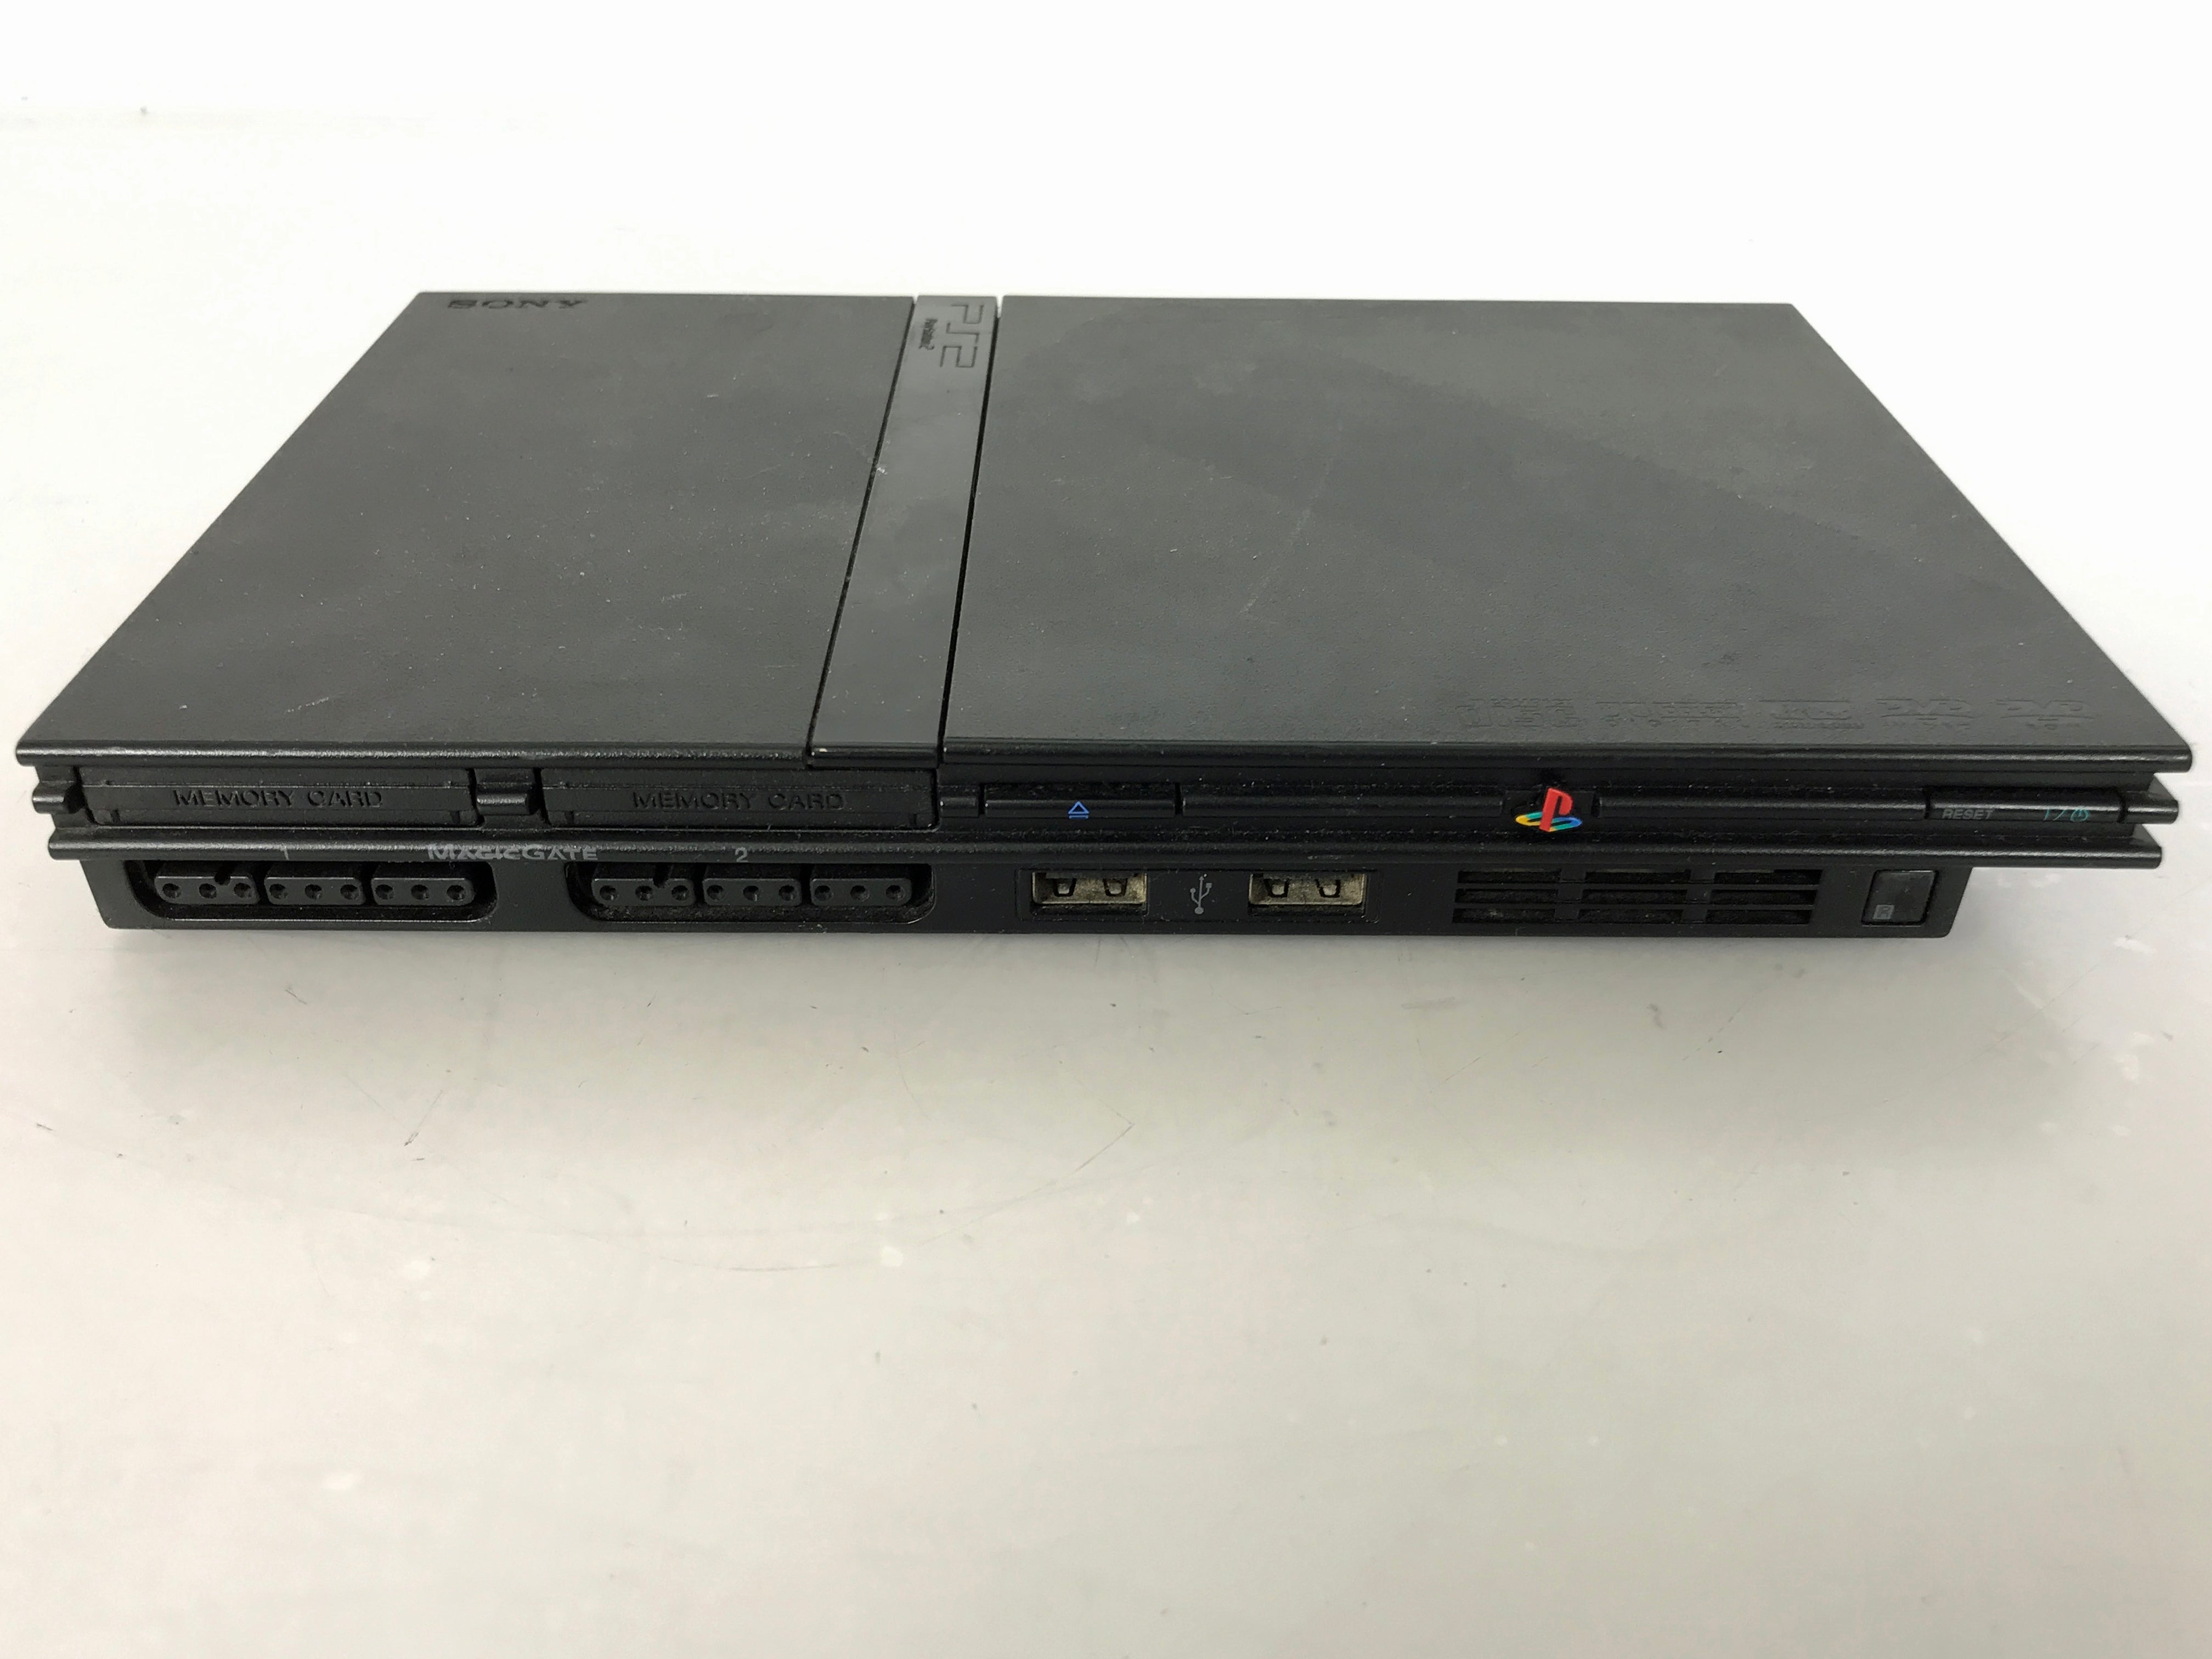 Sony PlayStation 2 Slim SCPH-75001 Gaming Console with A/V Cable *Noisy/No Power Cable*